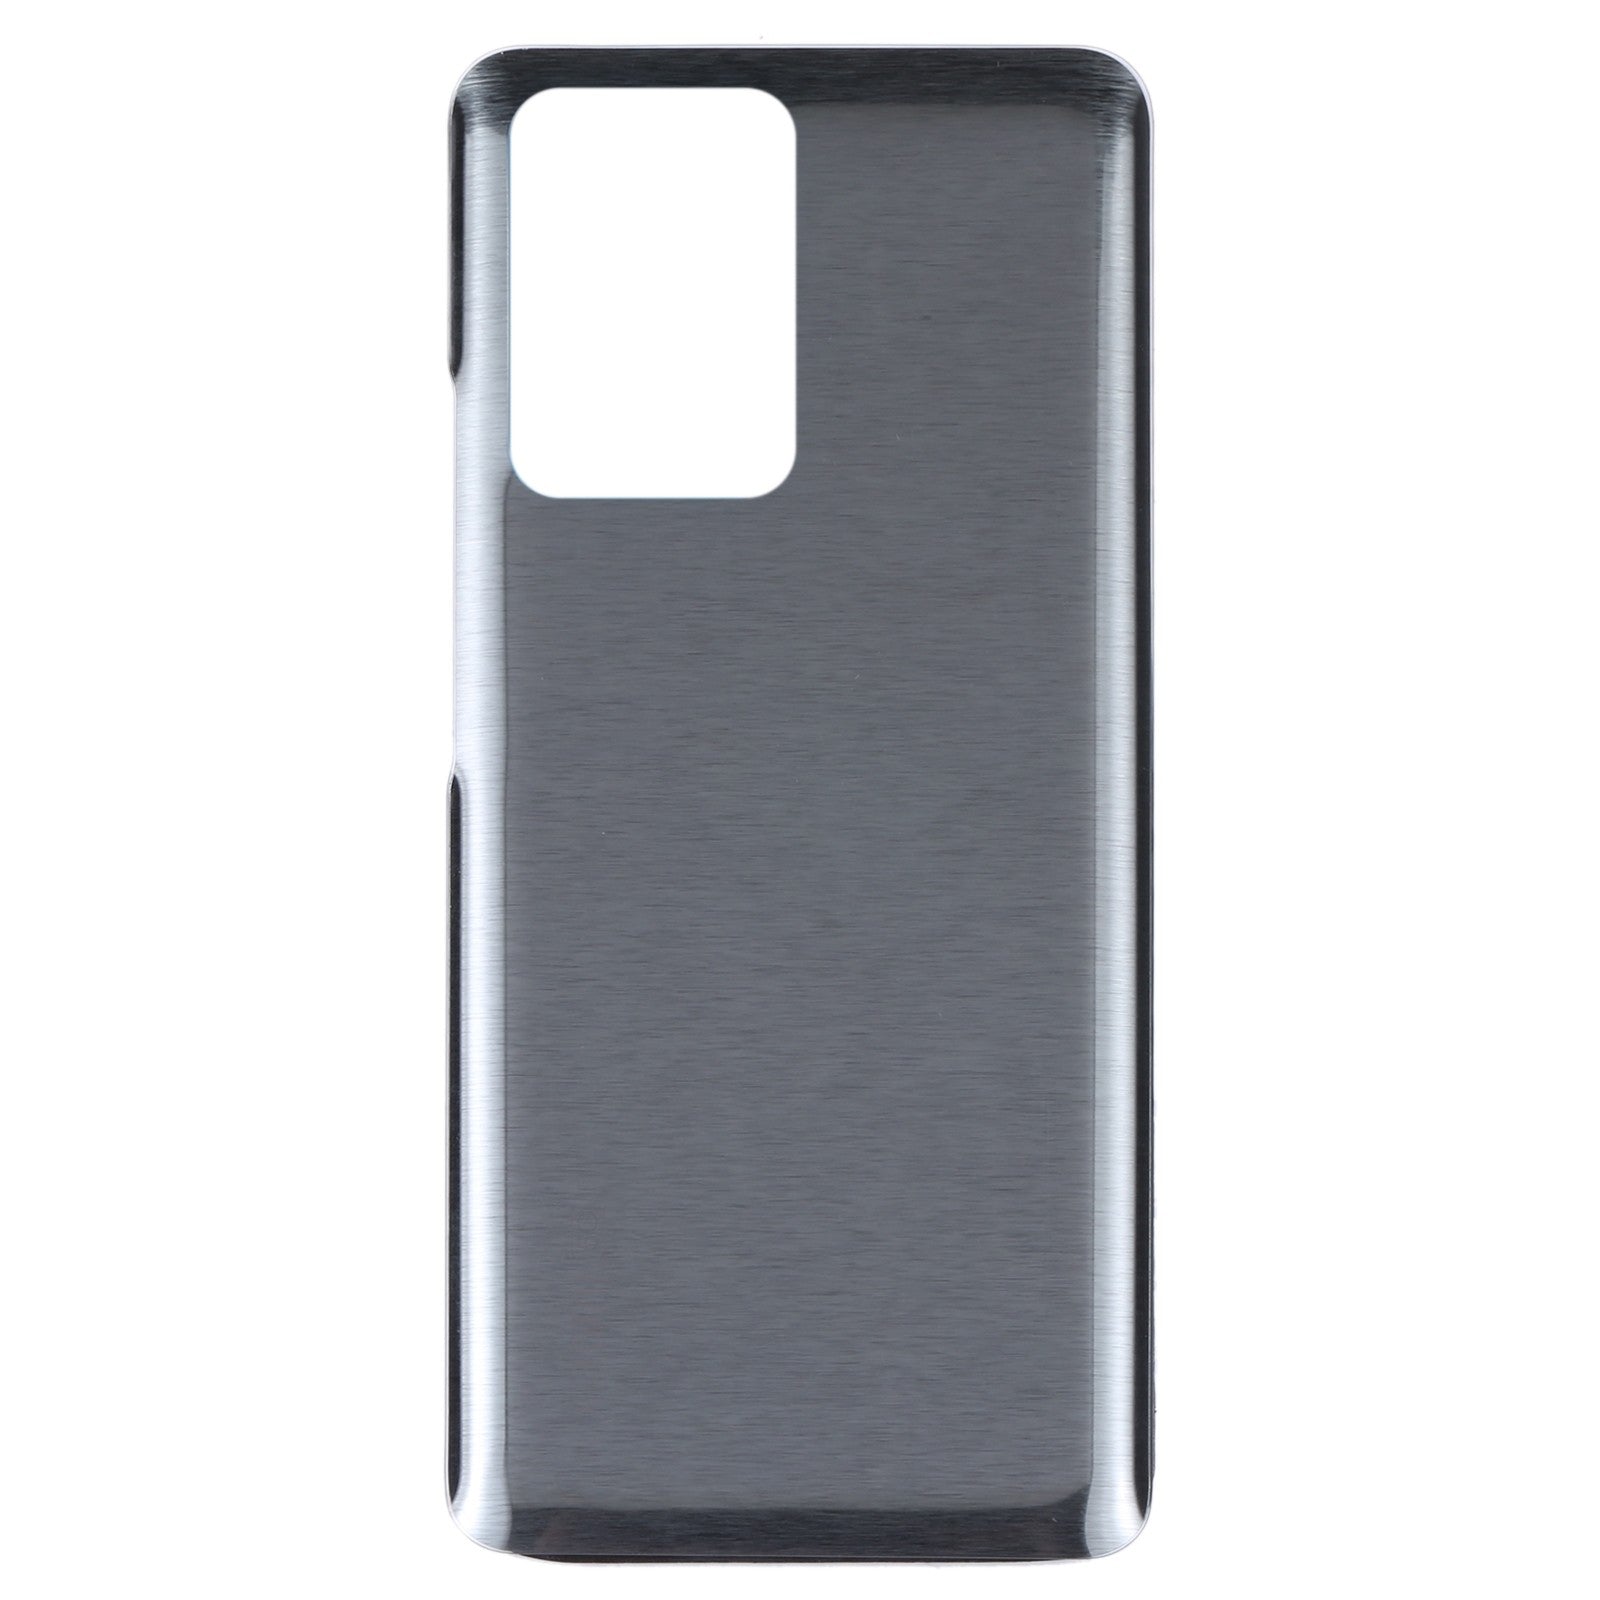 Mozomart Back Panel Glass without camera lens for Xiaomi Mi 11T Pro  - Meteorite Black (Grey)